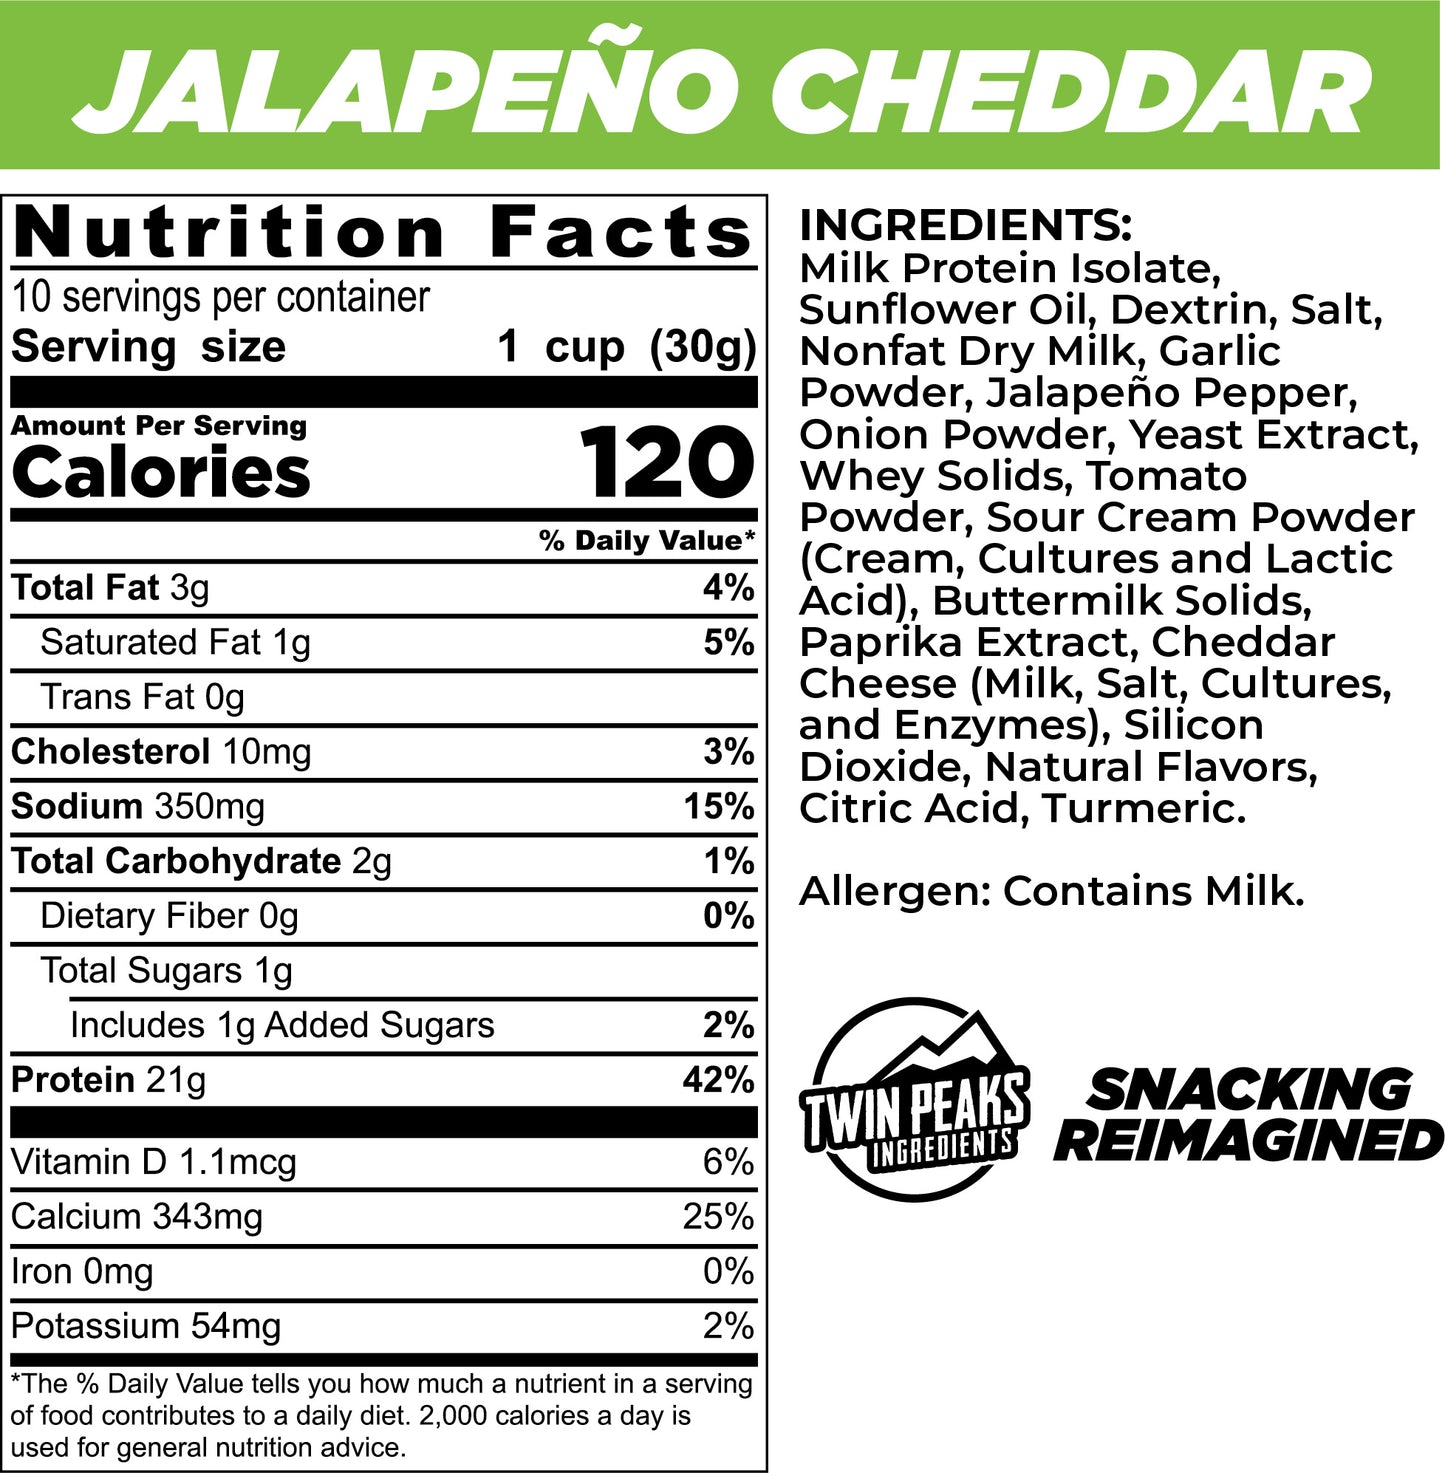 Jalapeno Cheddar Nutrition Facts & Ingredients